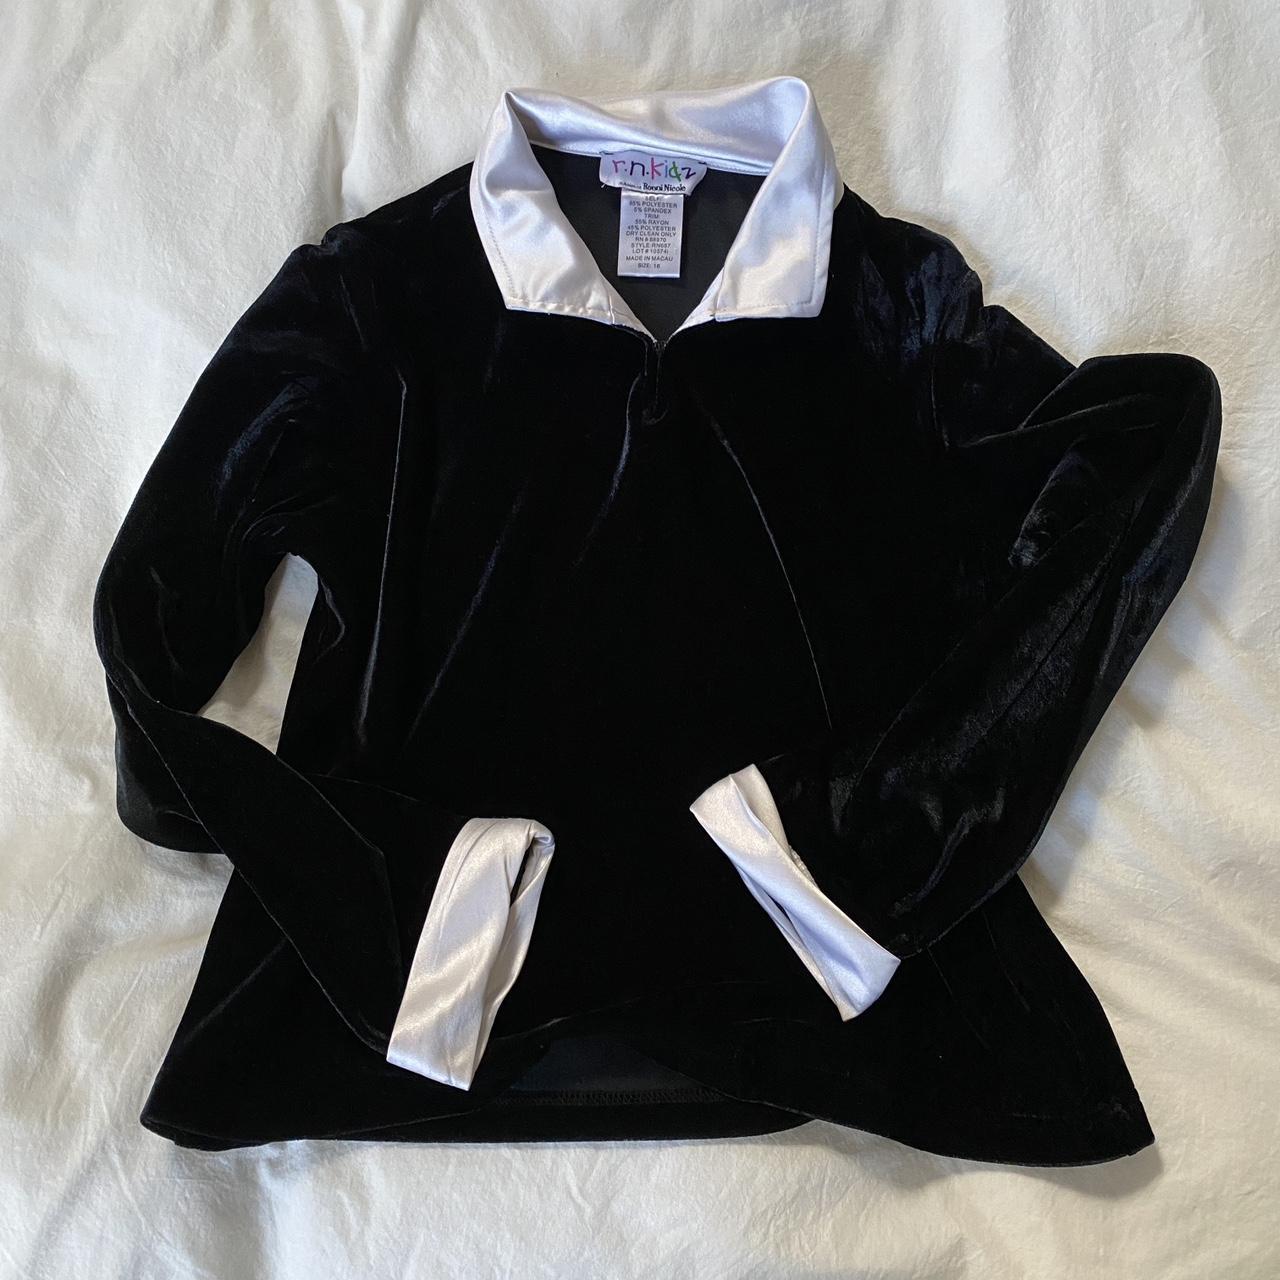 Women's Black and White Polo-shirts | Depop